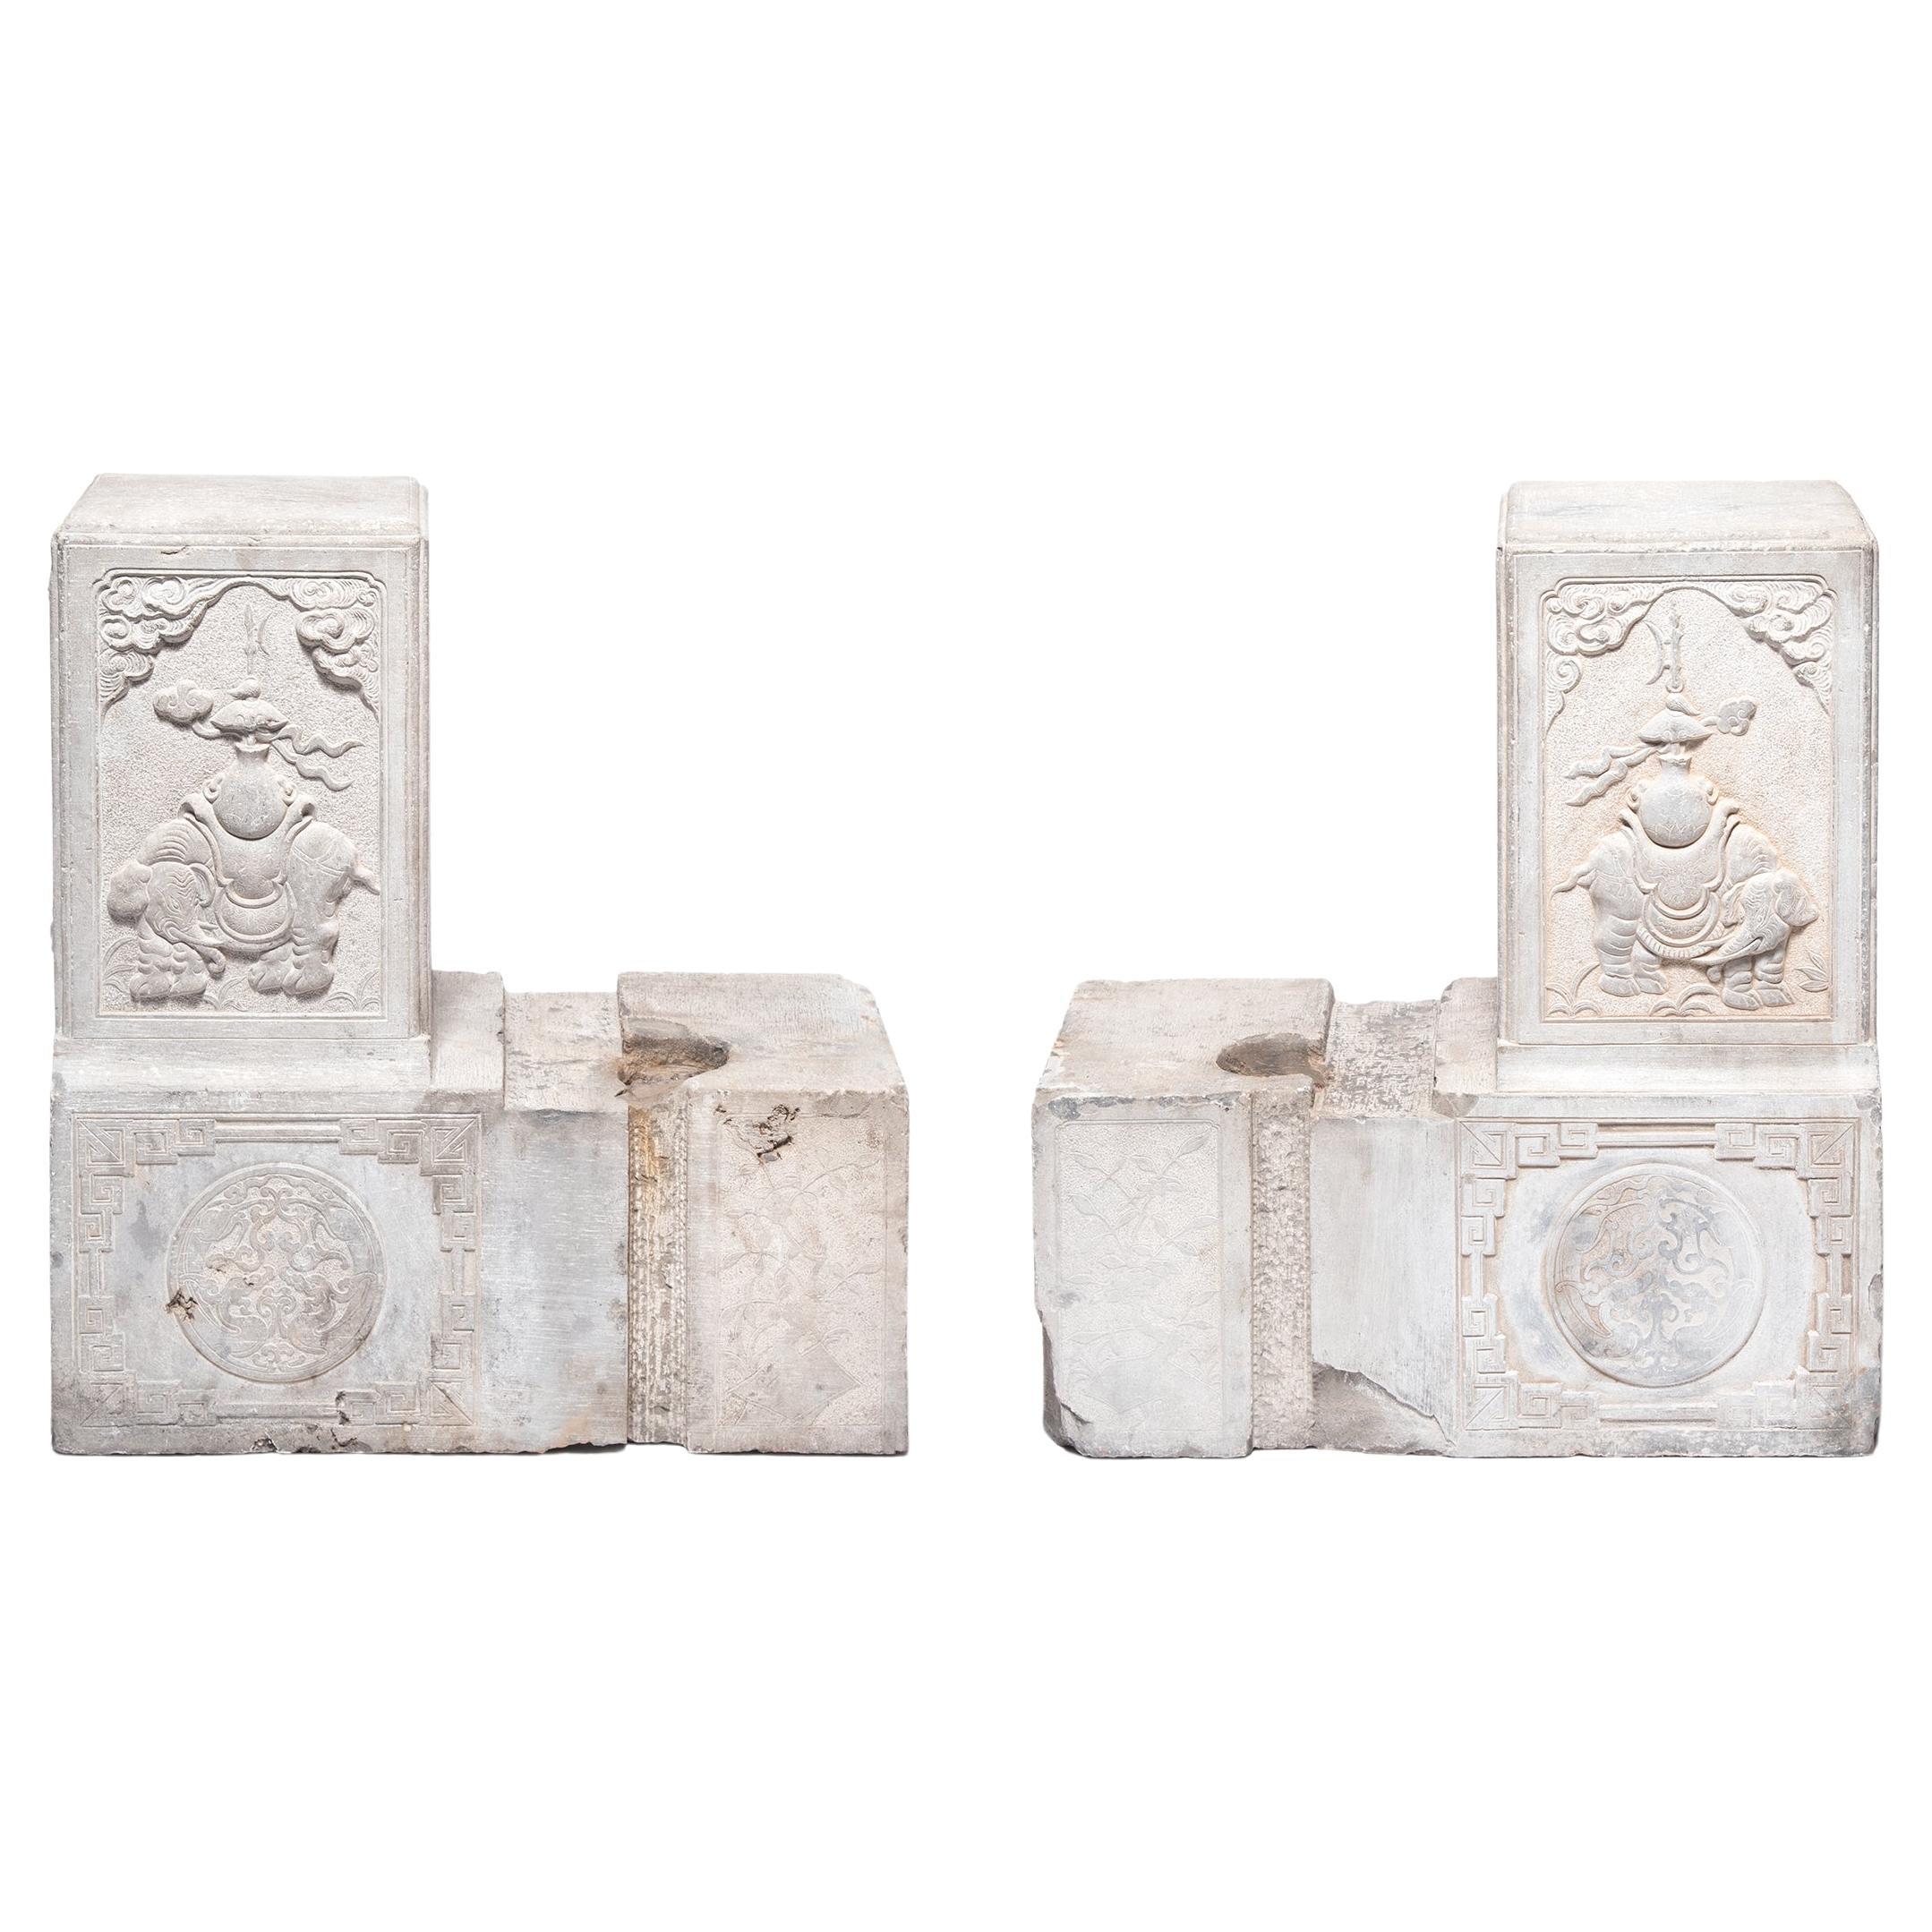 Pair of Chinese Stone Door Posts with Mythical Elephants, c. 1850